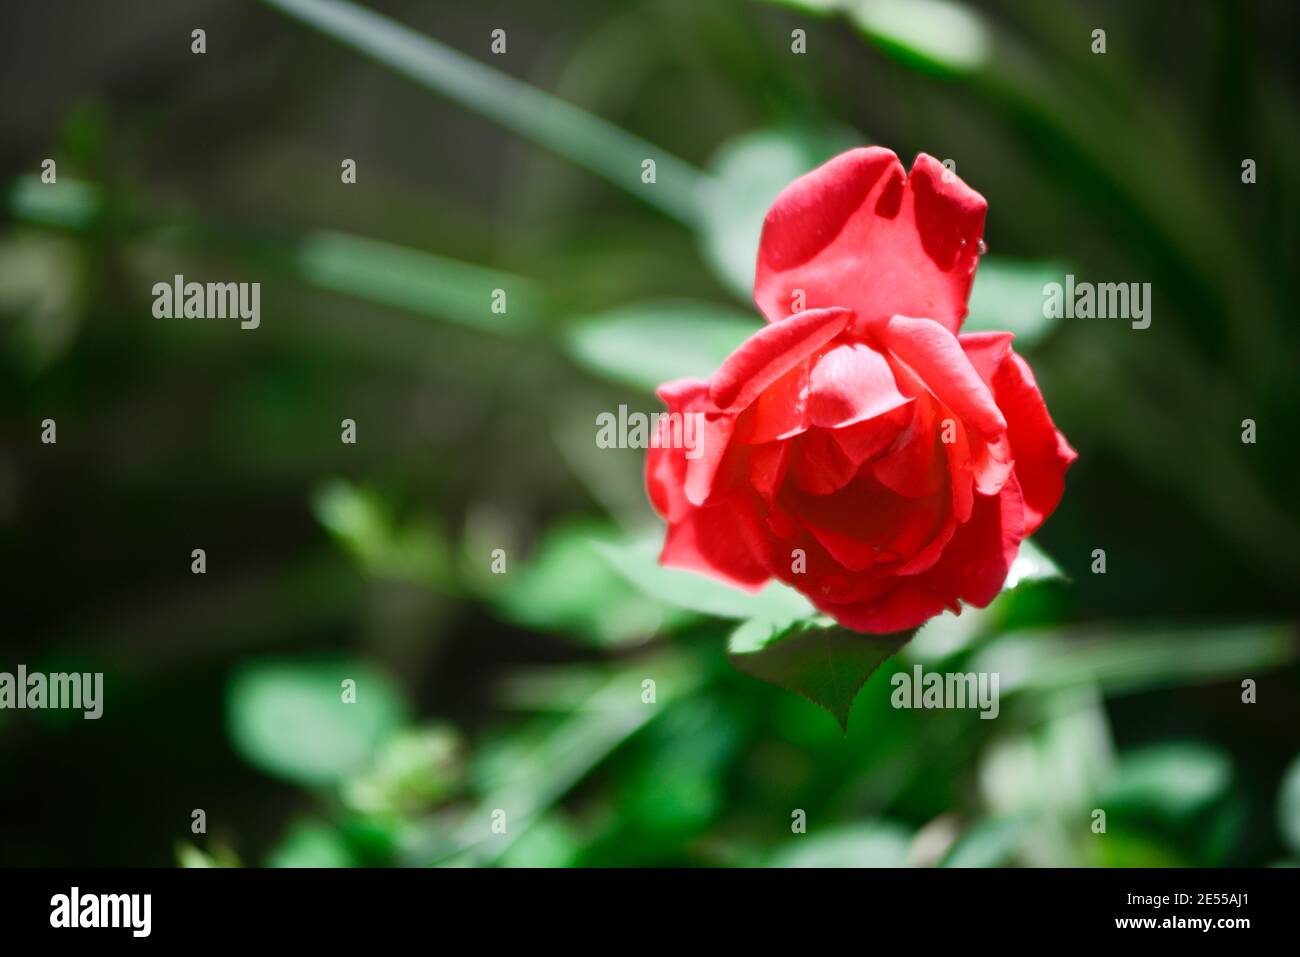 Red Rose in a house garden Stock Photo